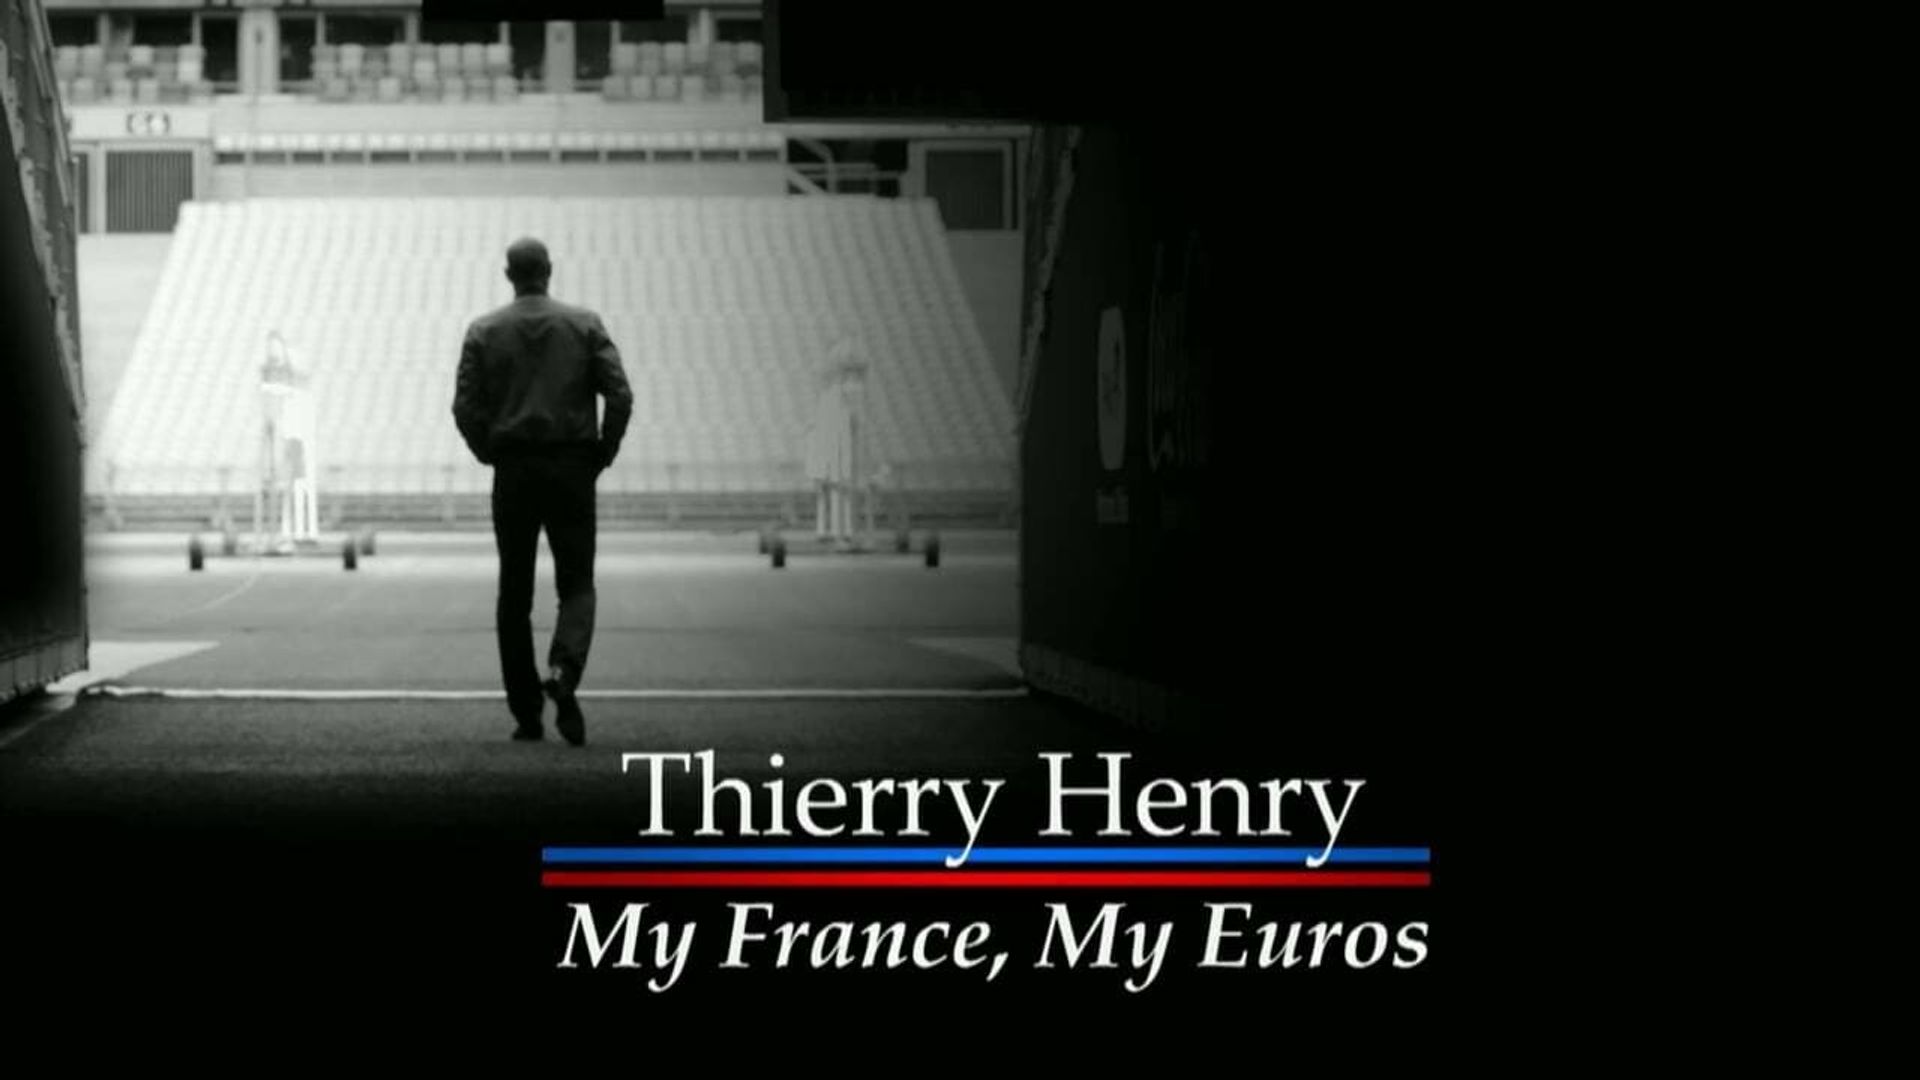 Thierry Henry: My France, My Euros background